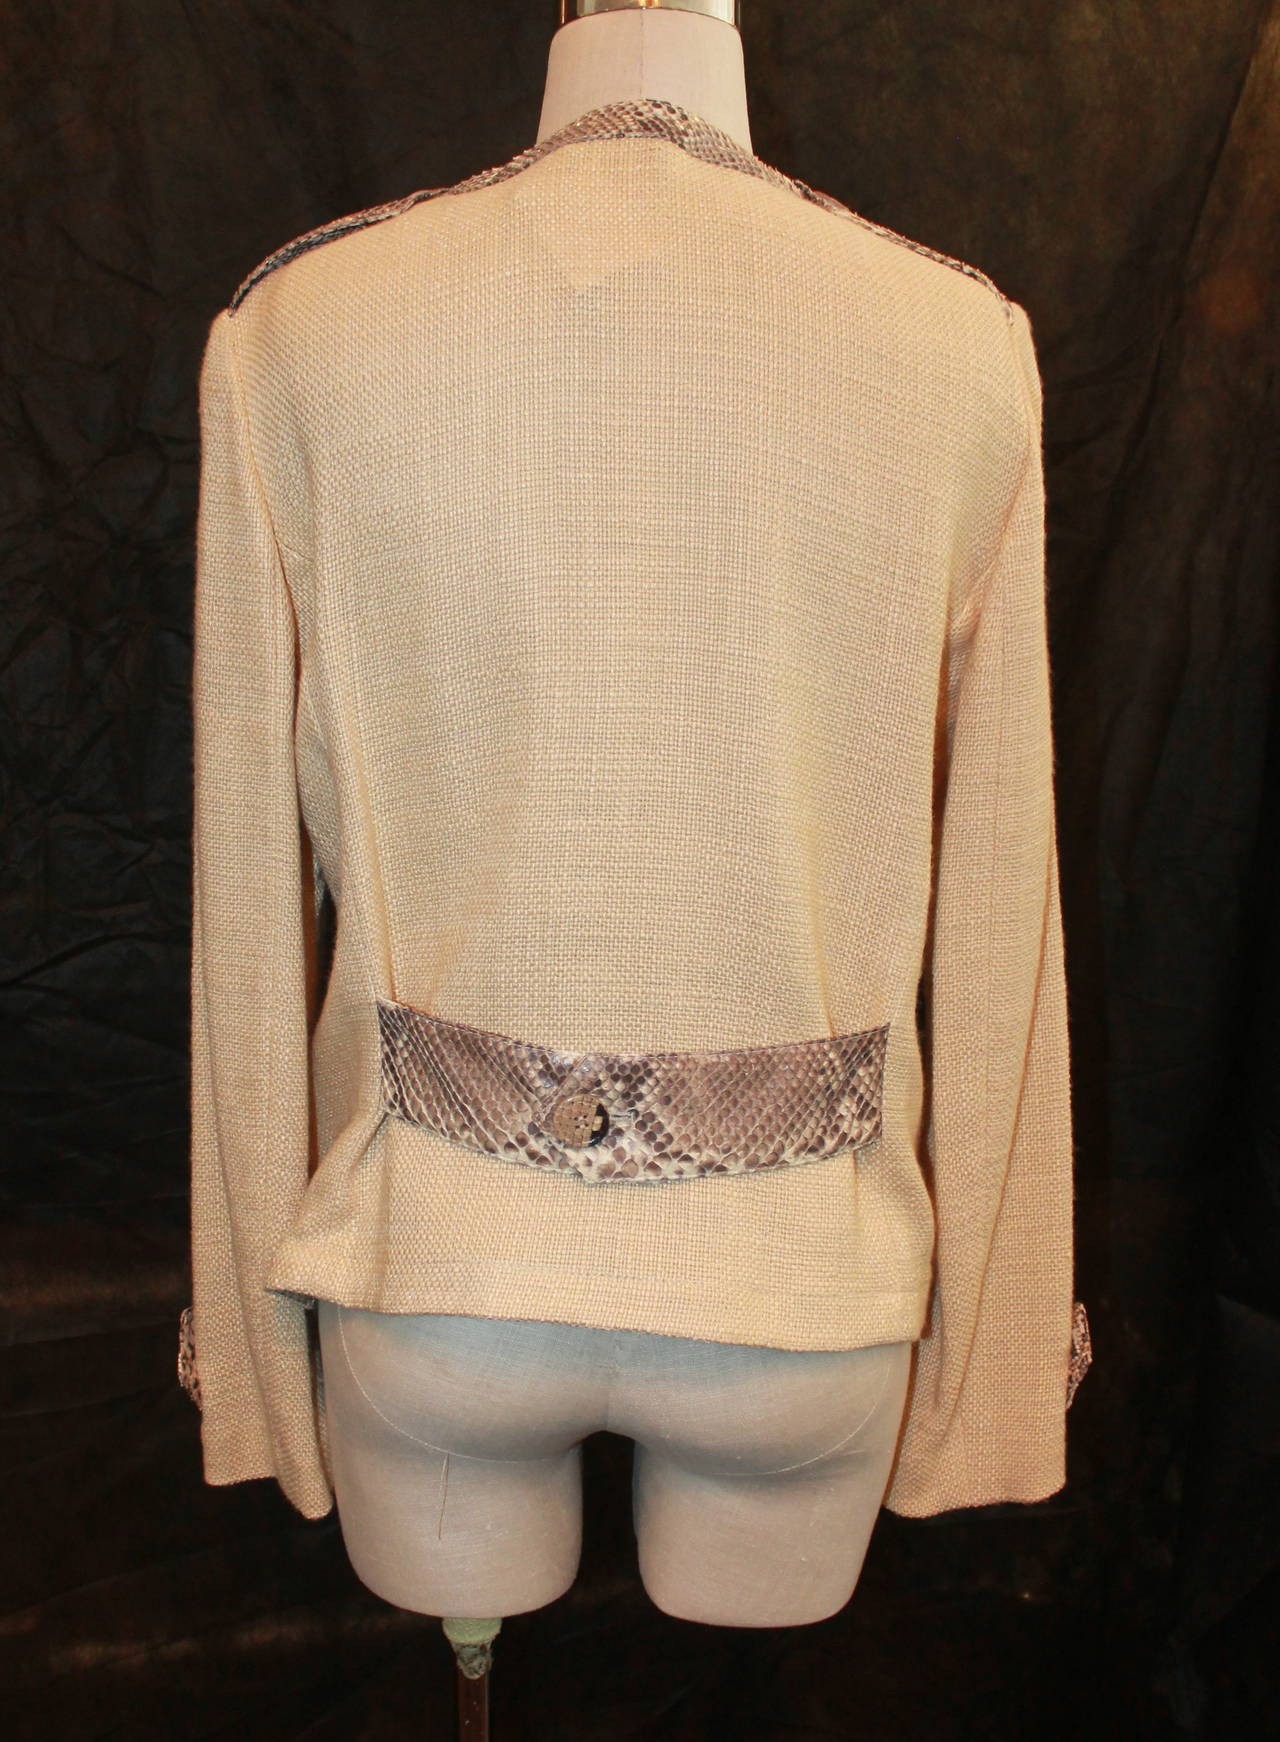 Women's Dolce & Gabbana Tan Linen Jacket with Python Accents